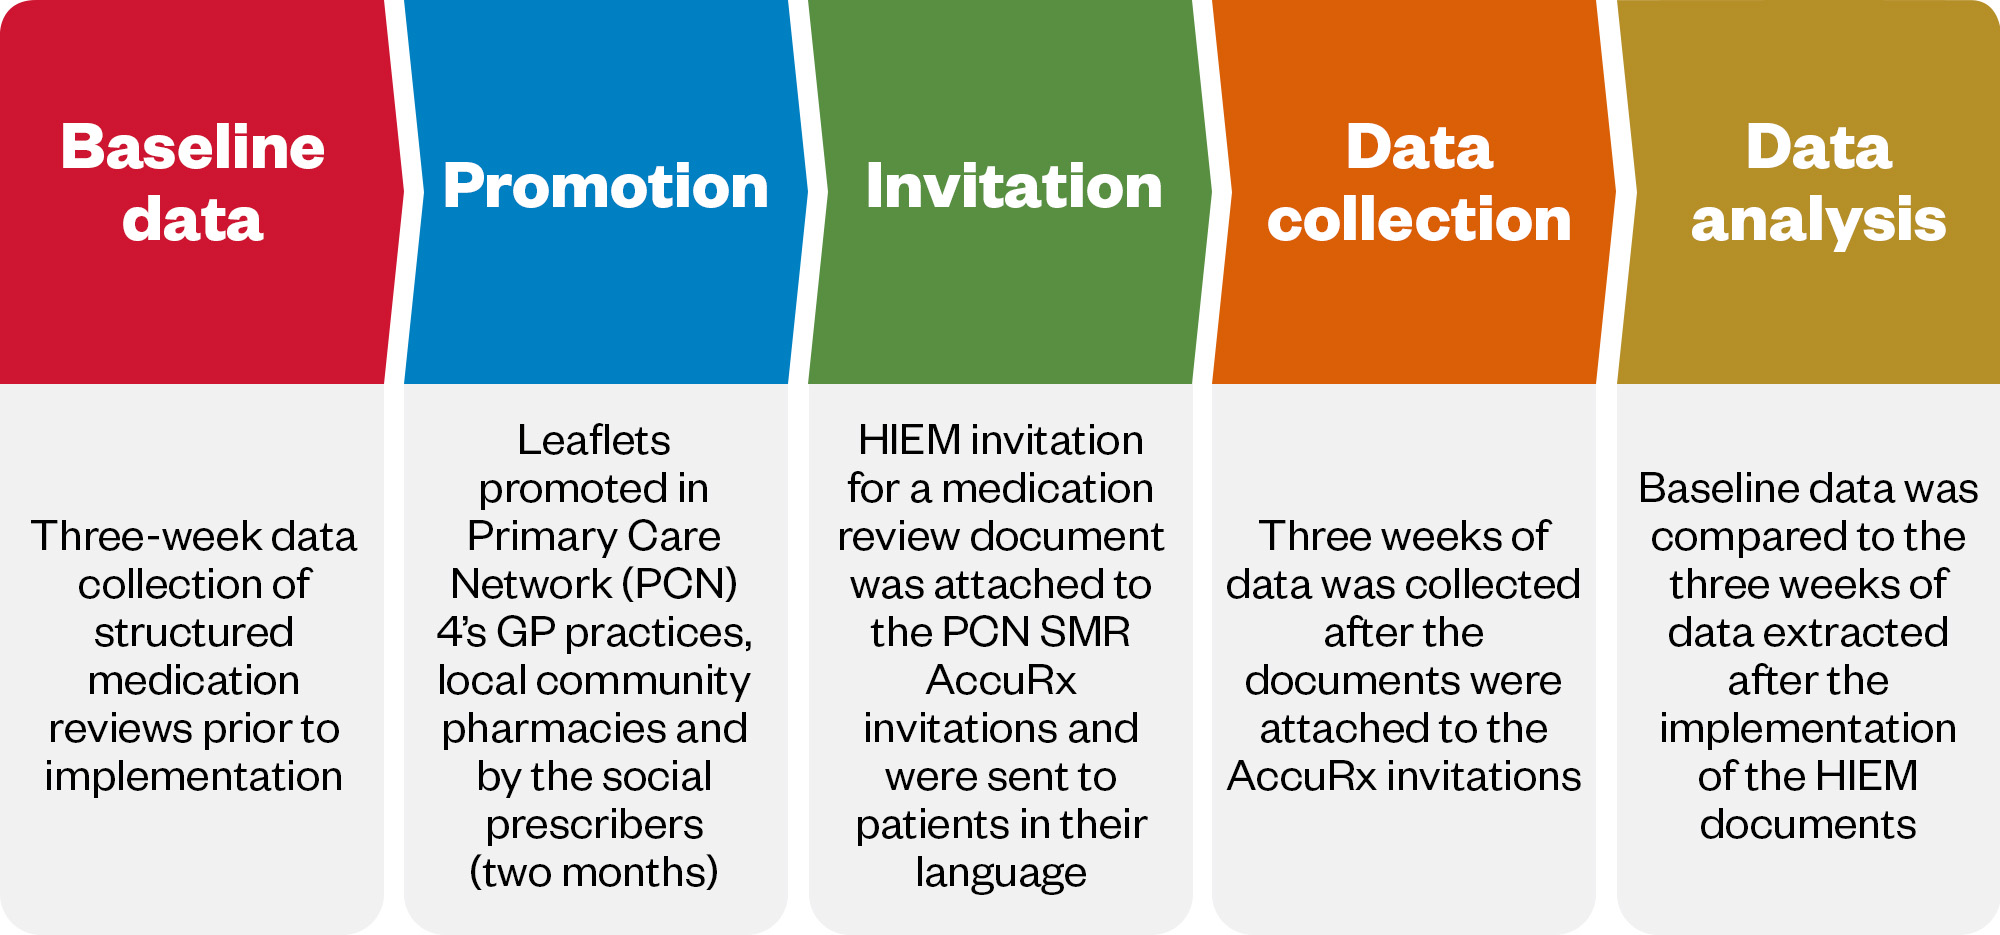 Diagram showing the data collection process, with 5 steps: baseline data, promotion, invitation, data collection and data analysis